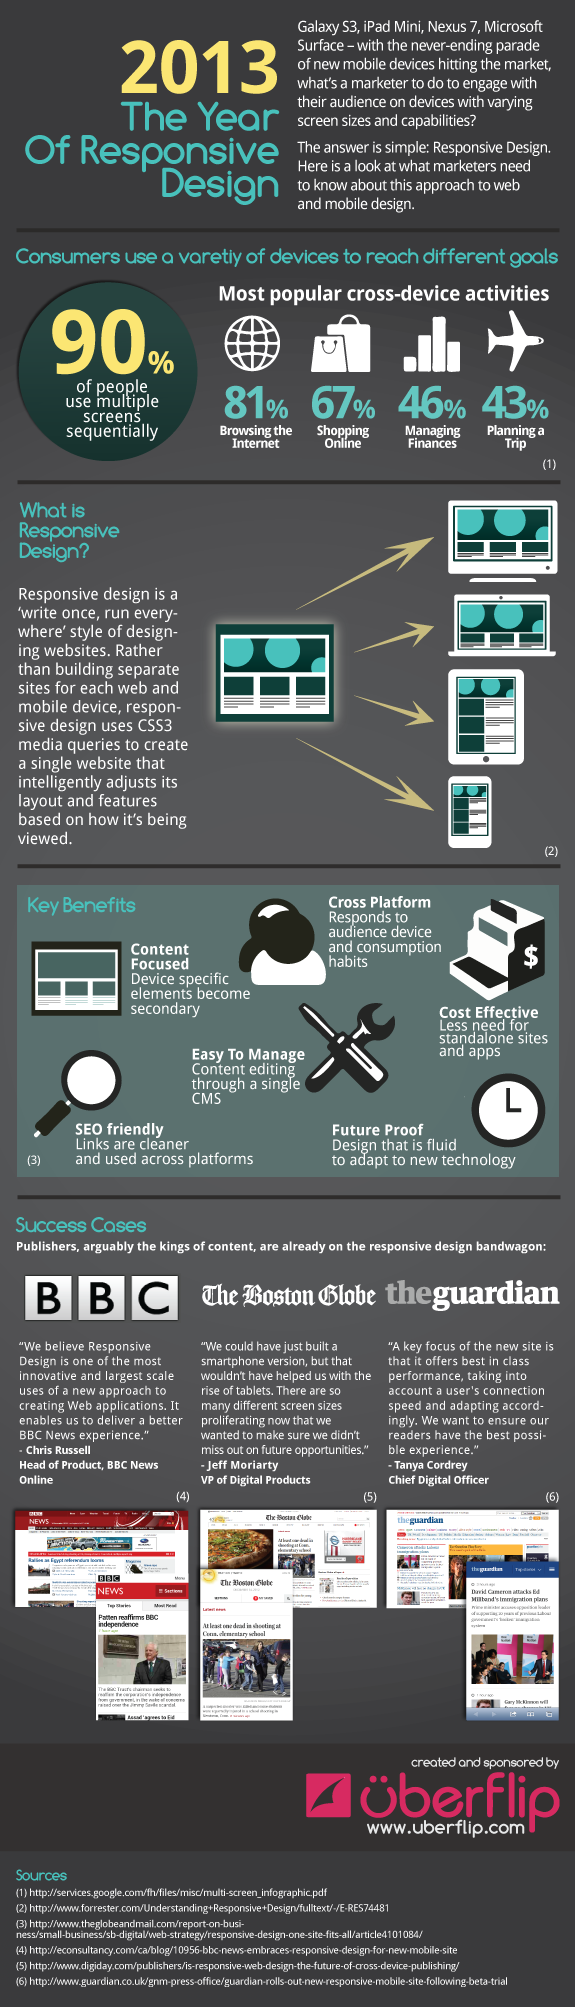 infographic-2013-the-year-of-responsive-web-design